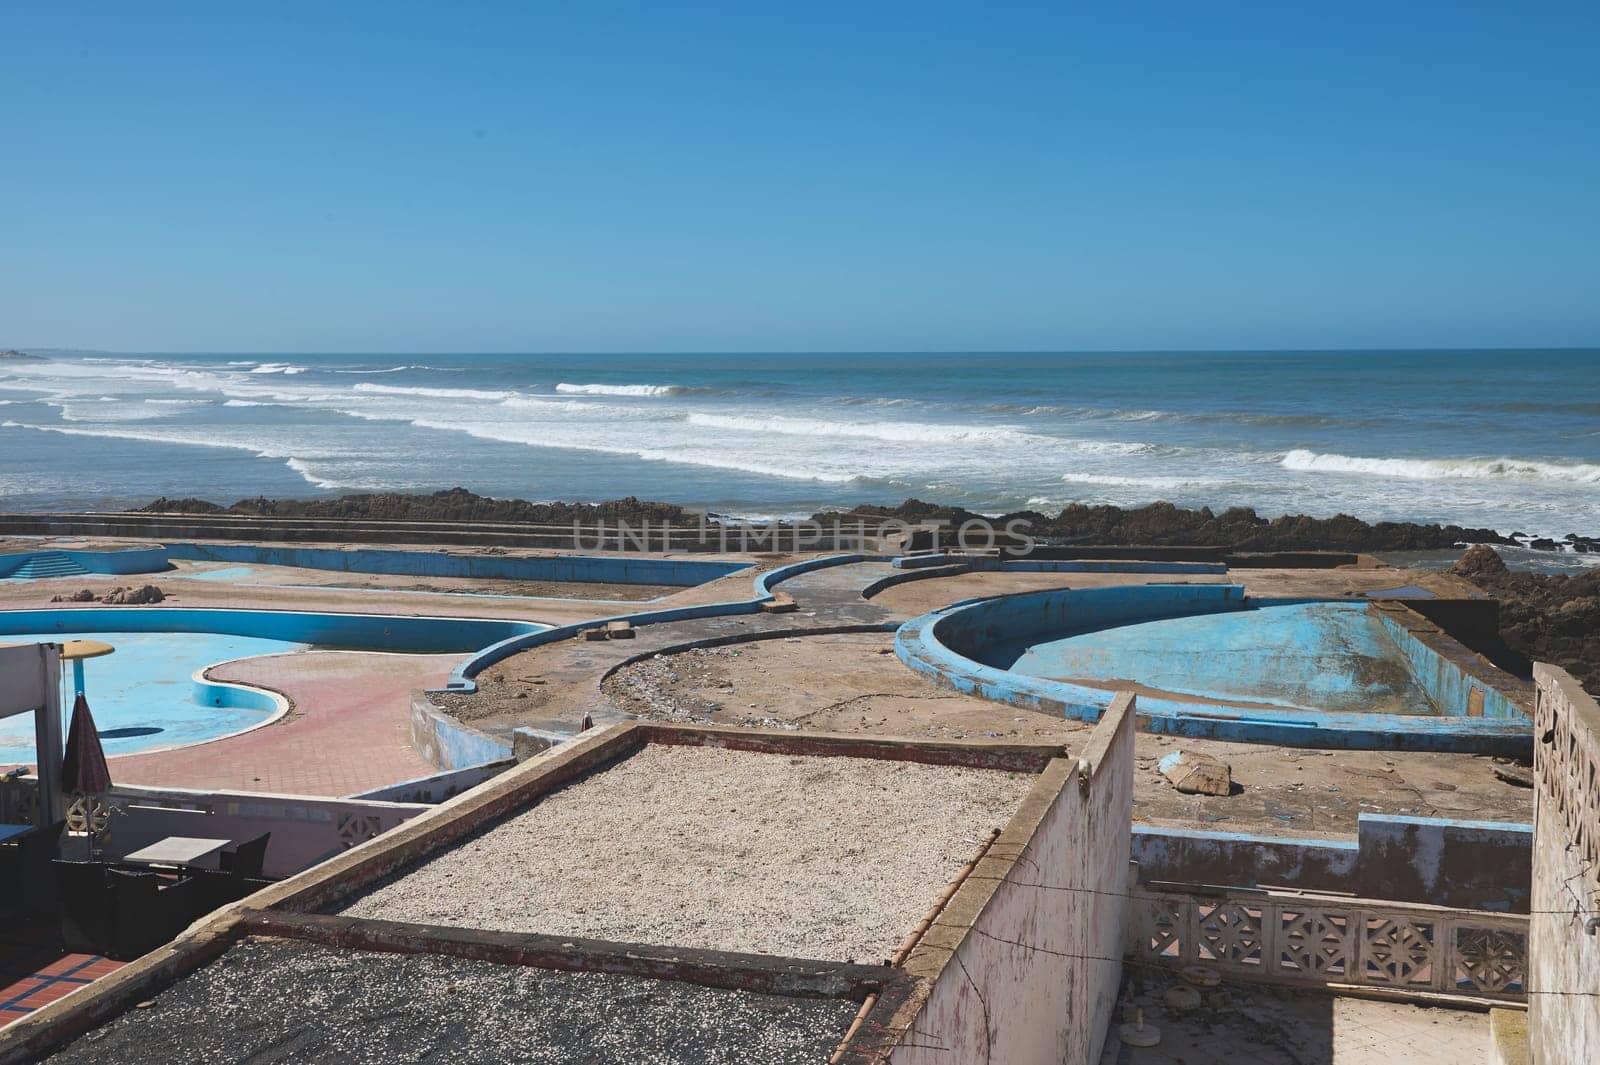 Abandoned swimming pool on the rooftop in Casablanca city, Atlantic beach on the background by artgf